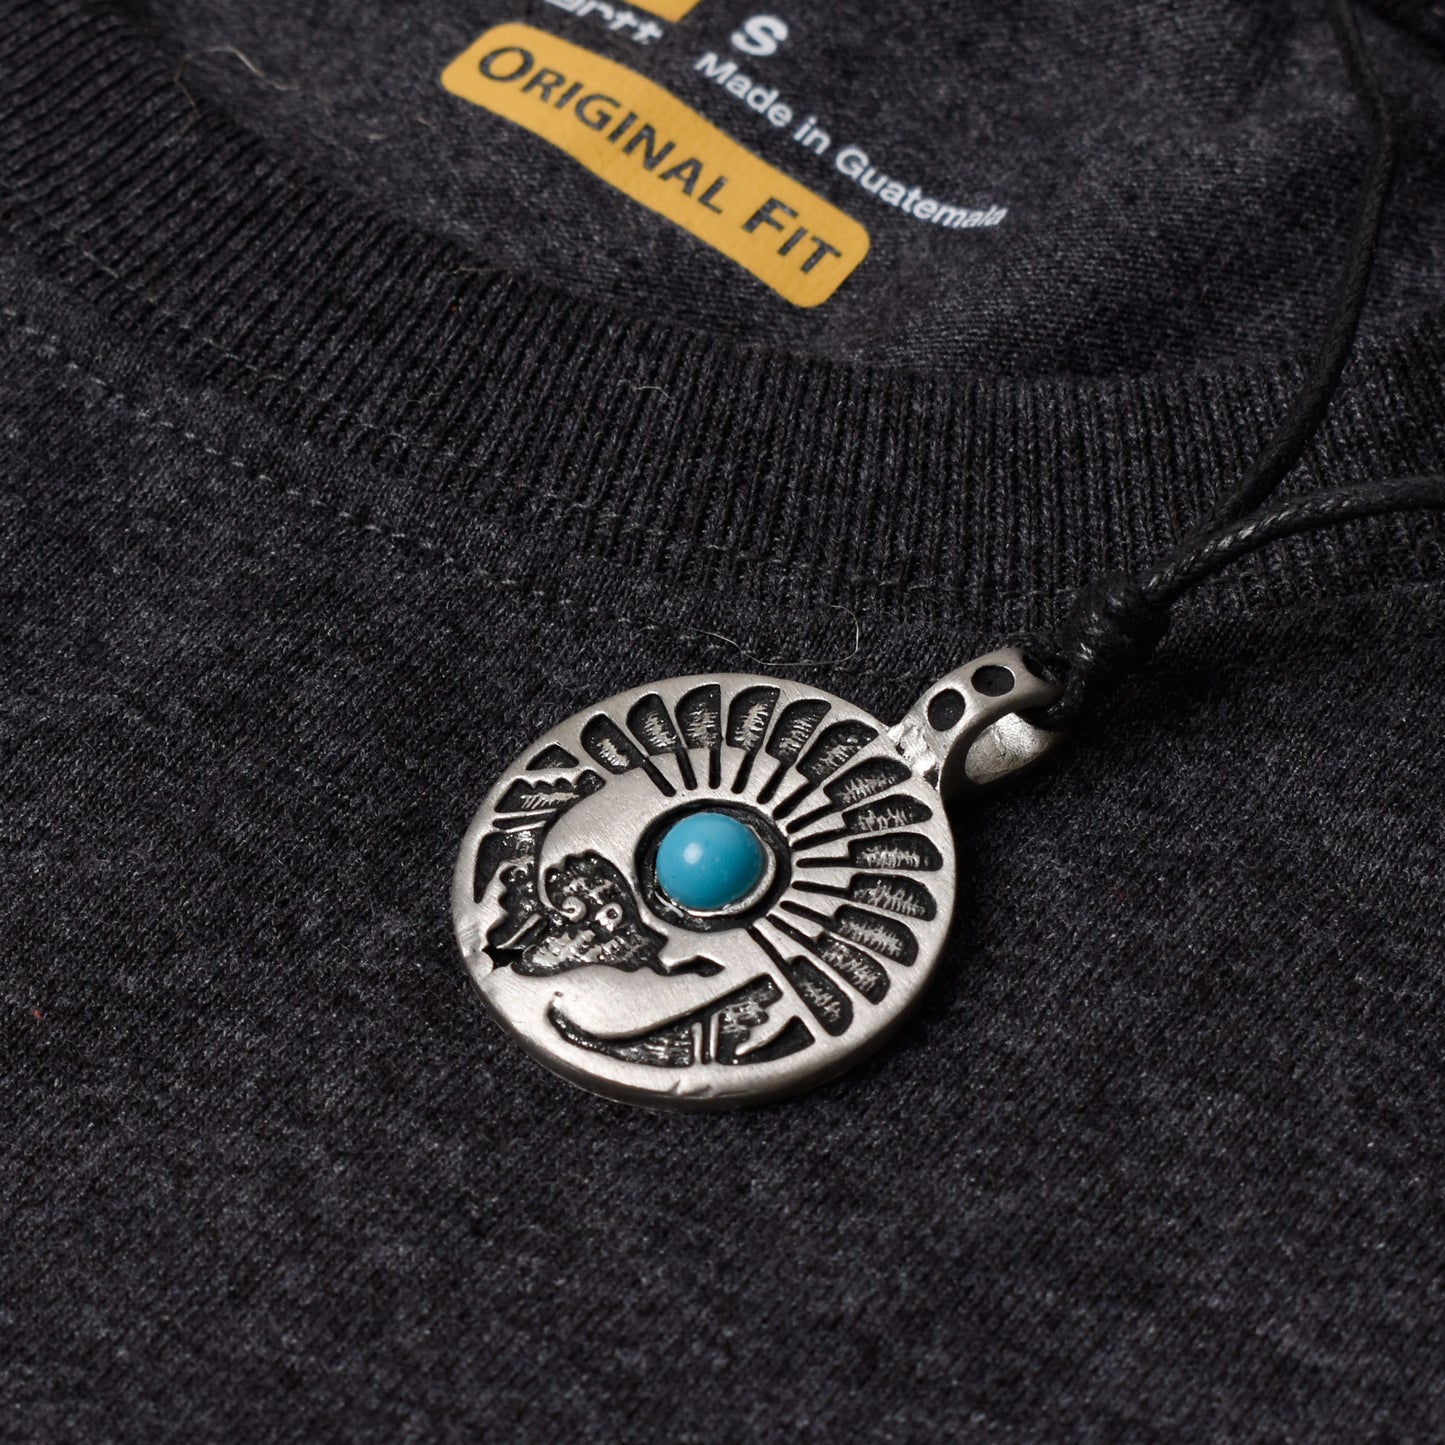 Native American Indian Symbol Silver Pewter Charm Necklace Pendant Jewelry